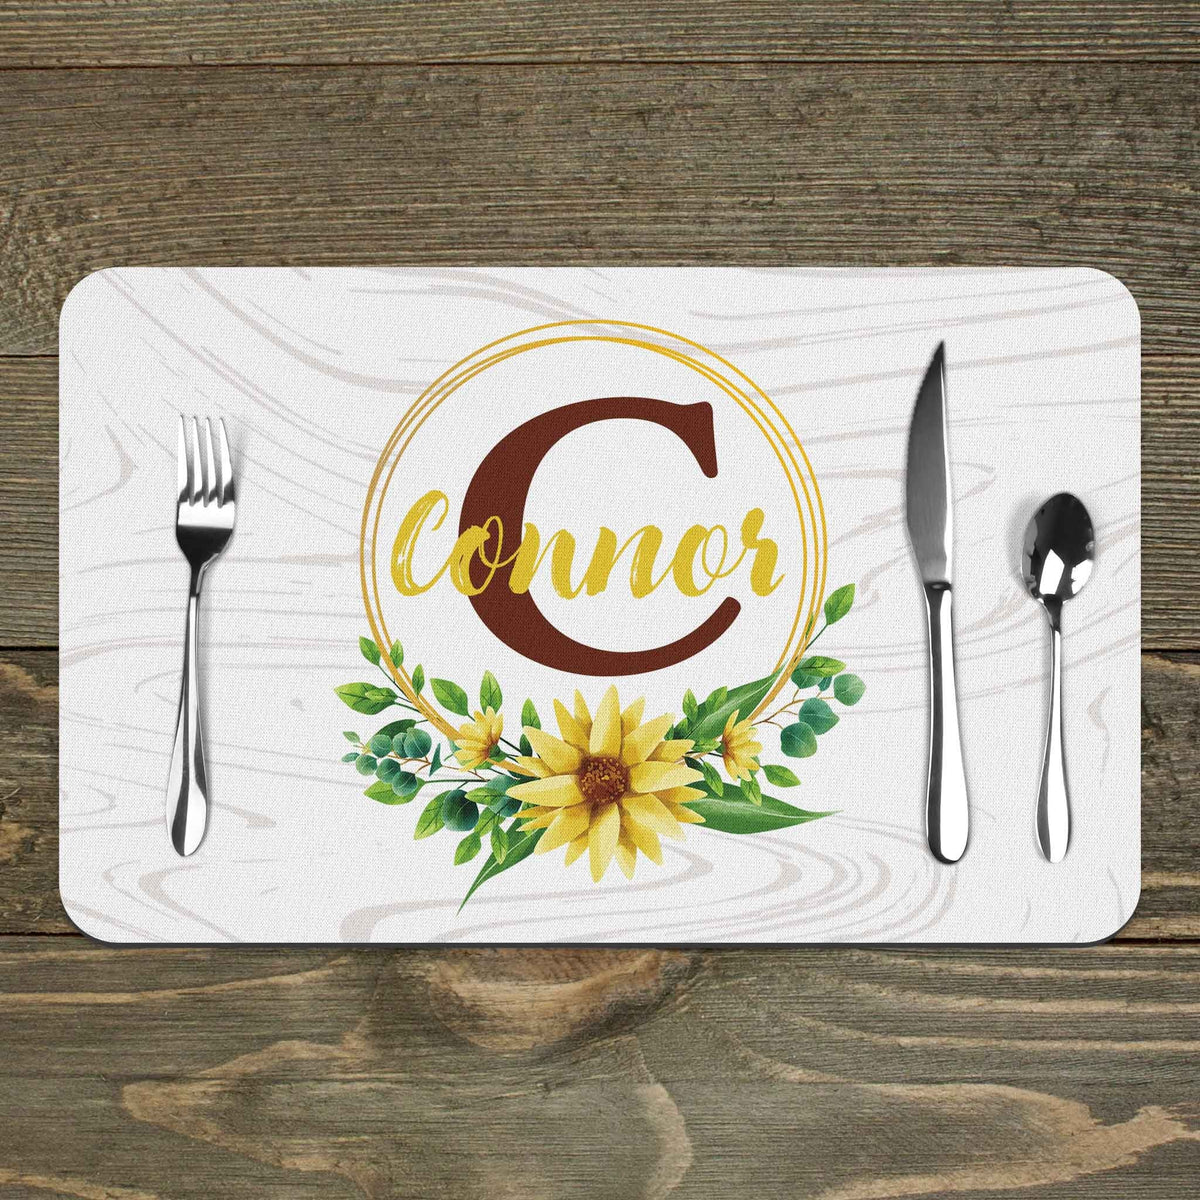 Custom Placemats | Personalized Dining and Serving | Sunflower Monogram